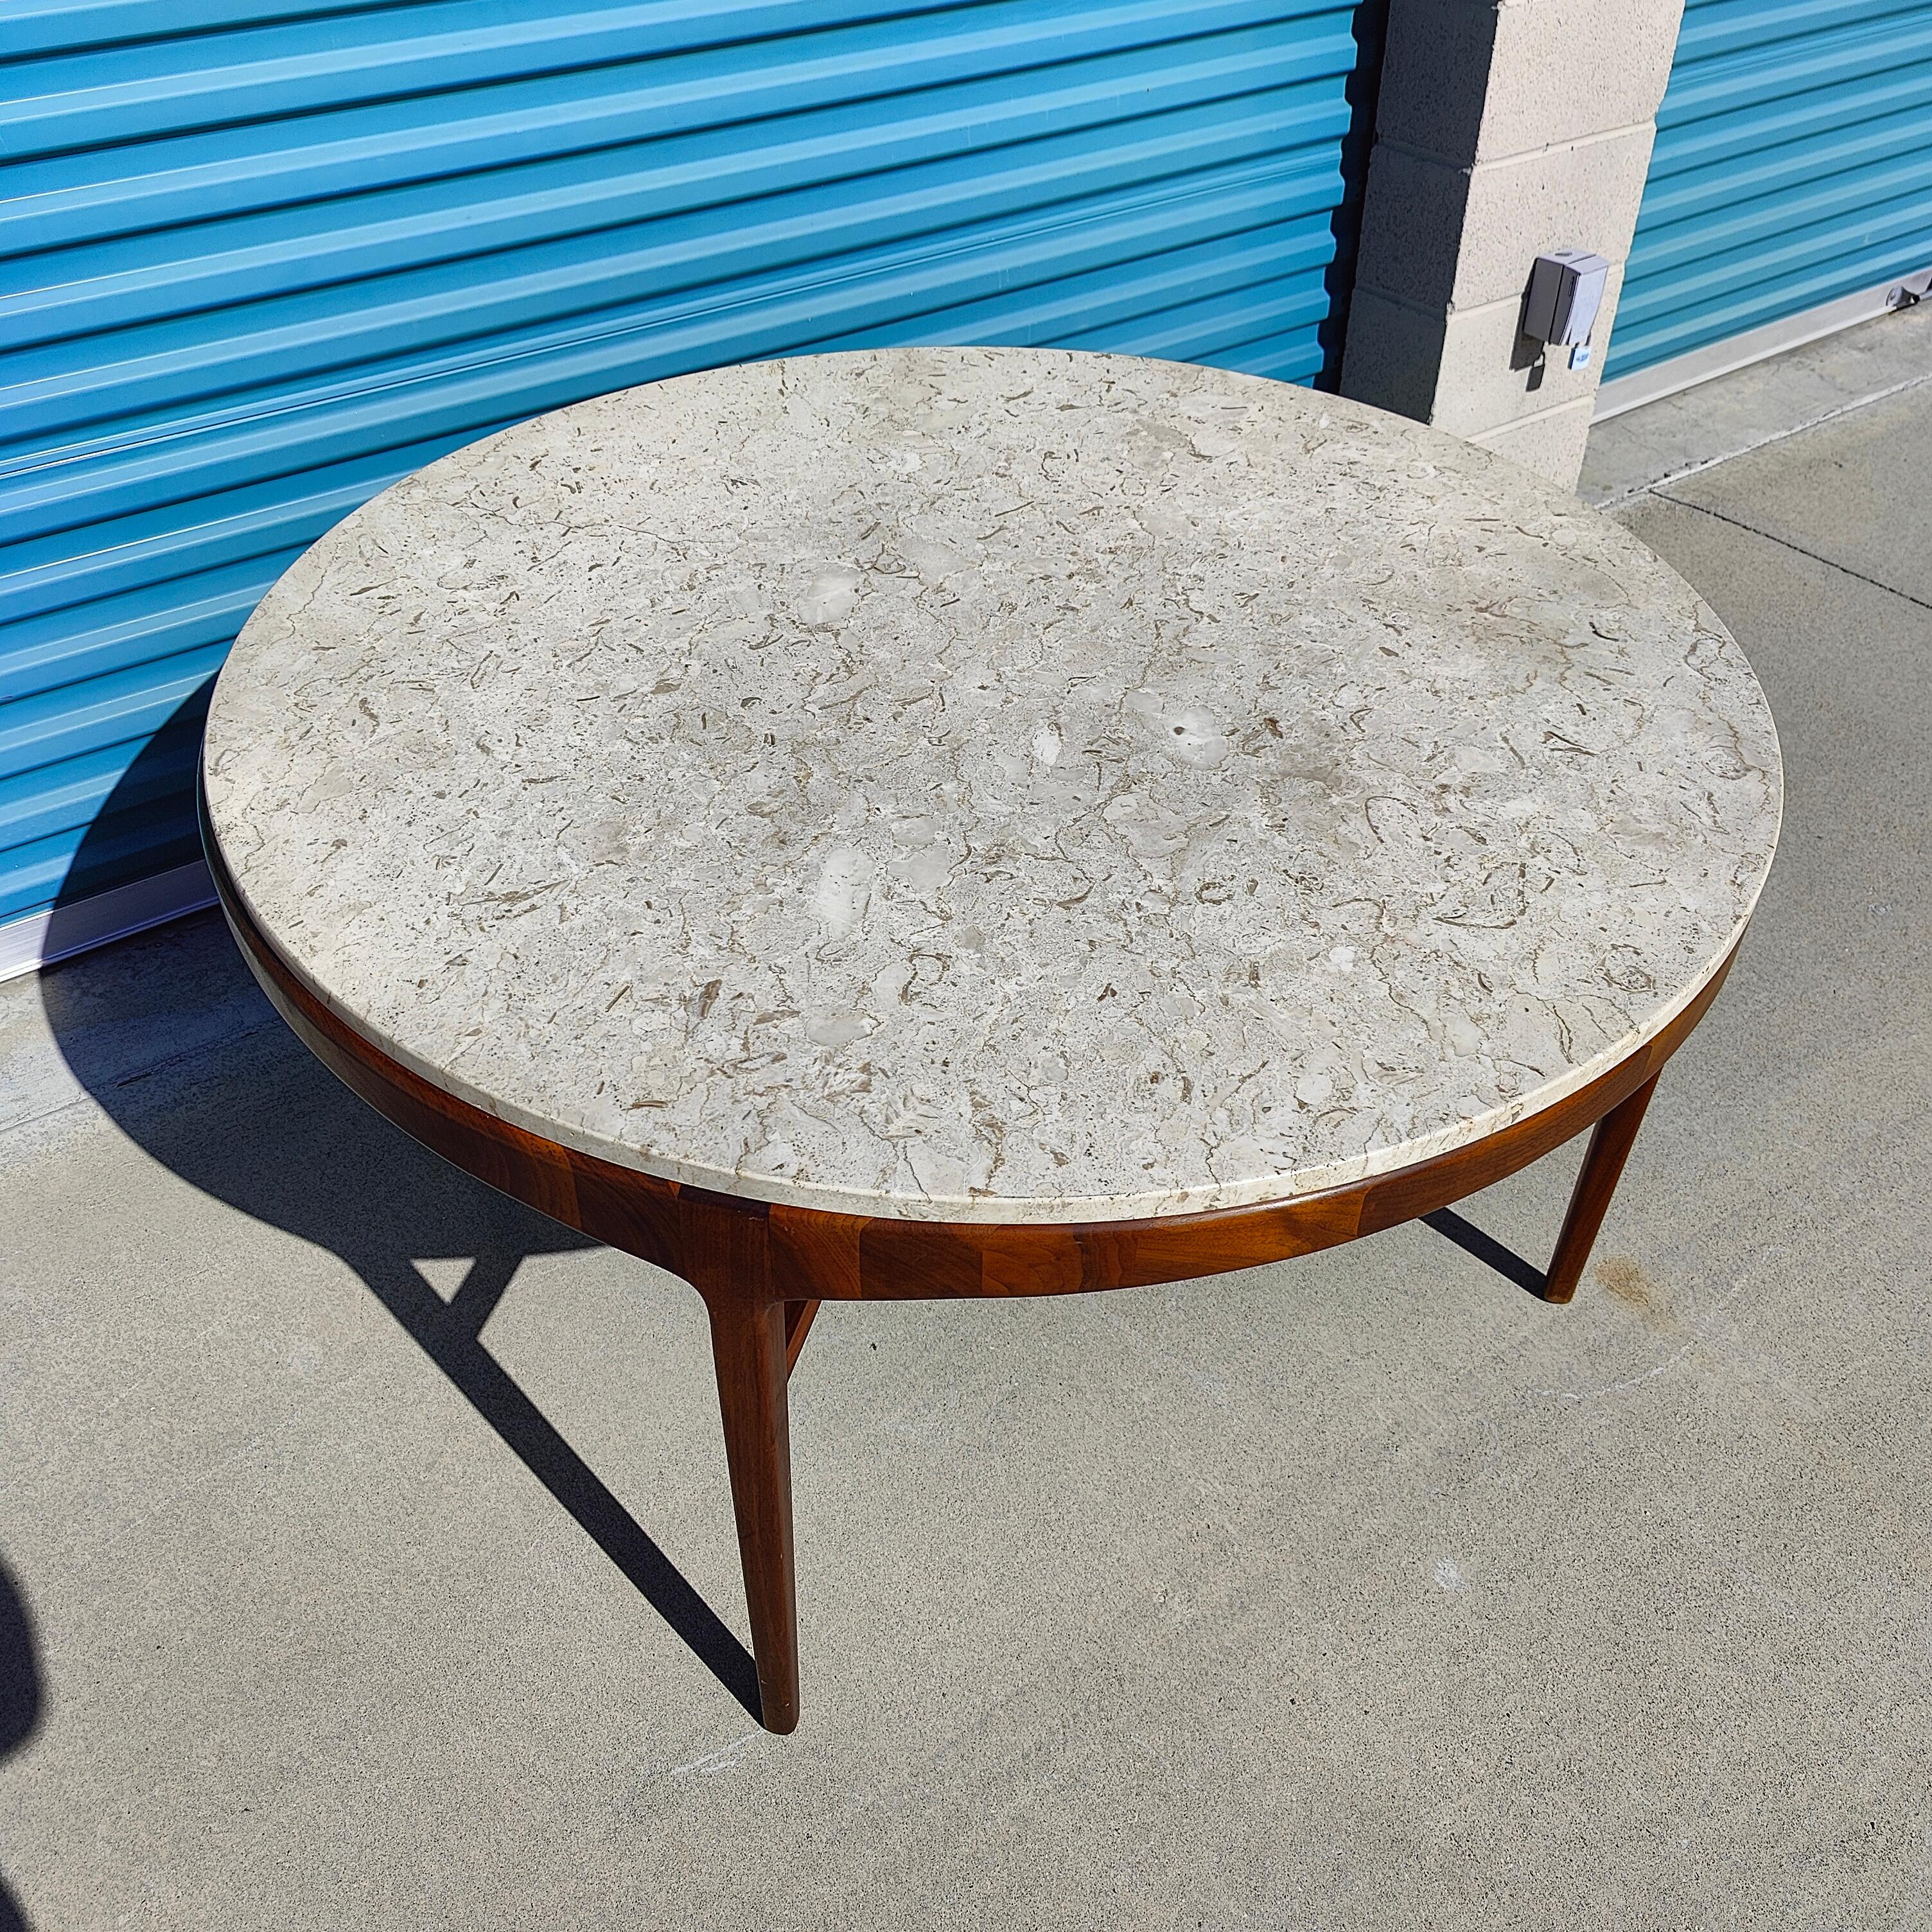 20th Century Mid-Century Modern Marble Top 'Rhythm' Game Table by Lane For Sale